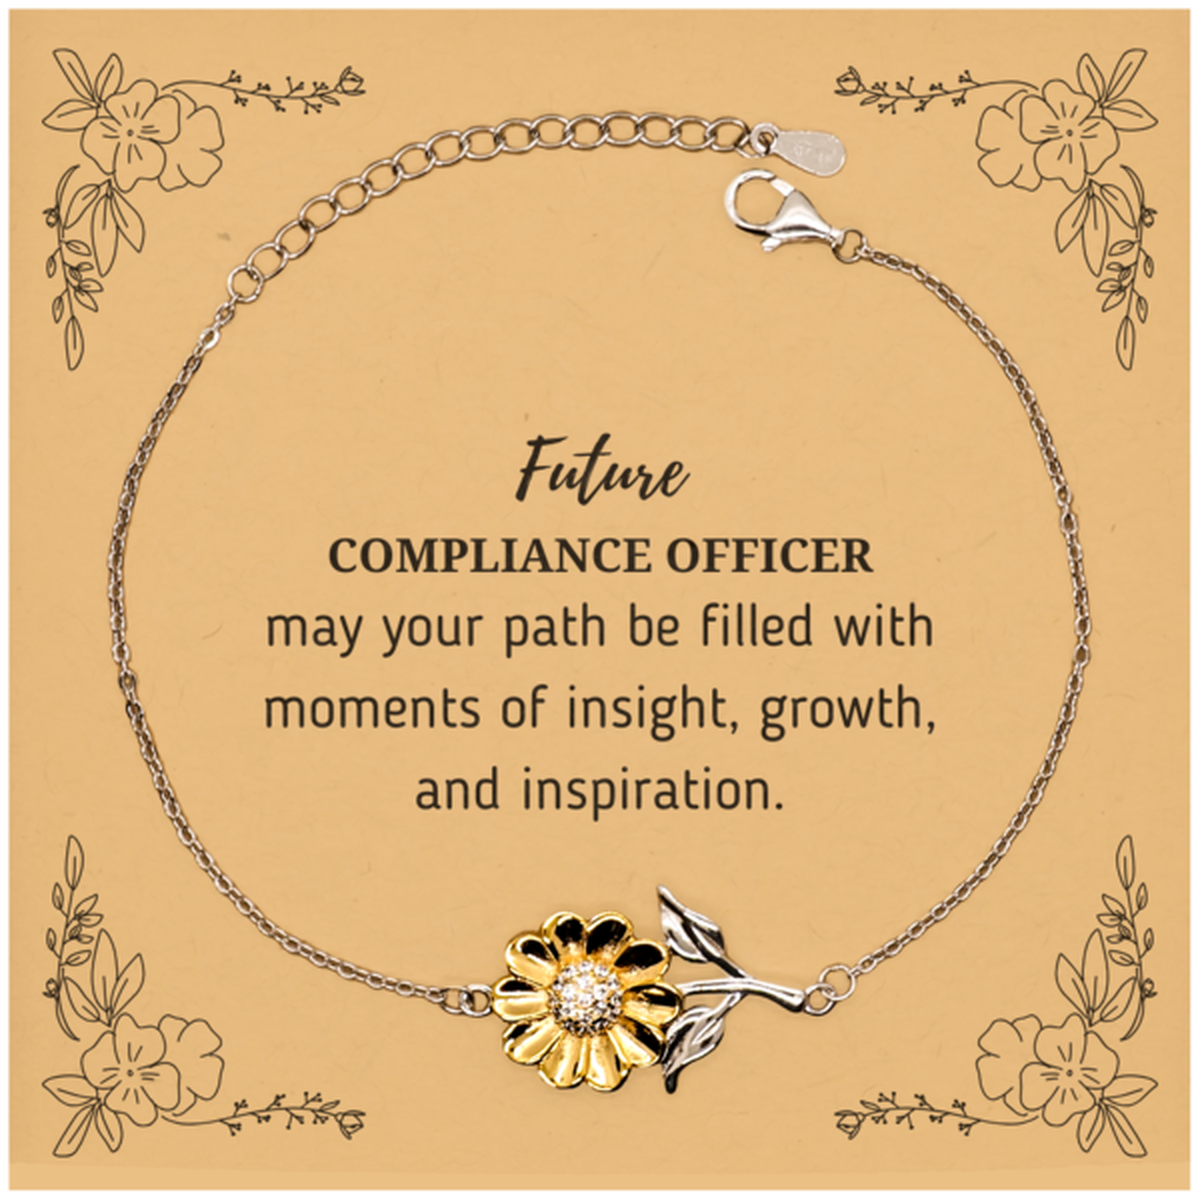 Future Compliance Officer Gifts, May your path be filled with moments of insight, Graduation Gifts for New Compliance Officer, Christmas Unique Sunflower Bracelet For Men, Women, Friends